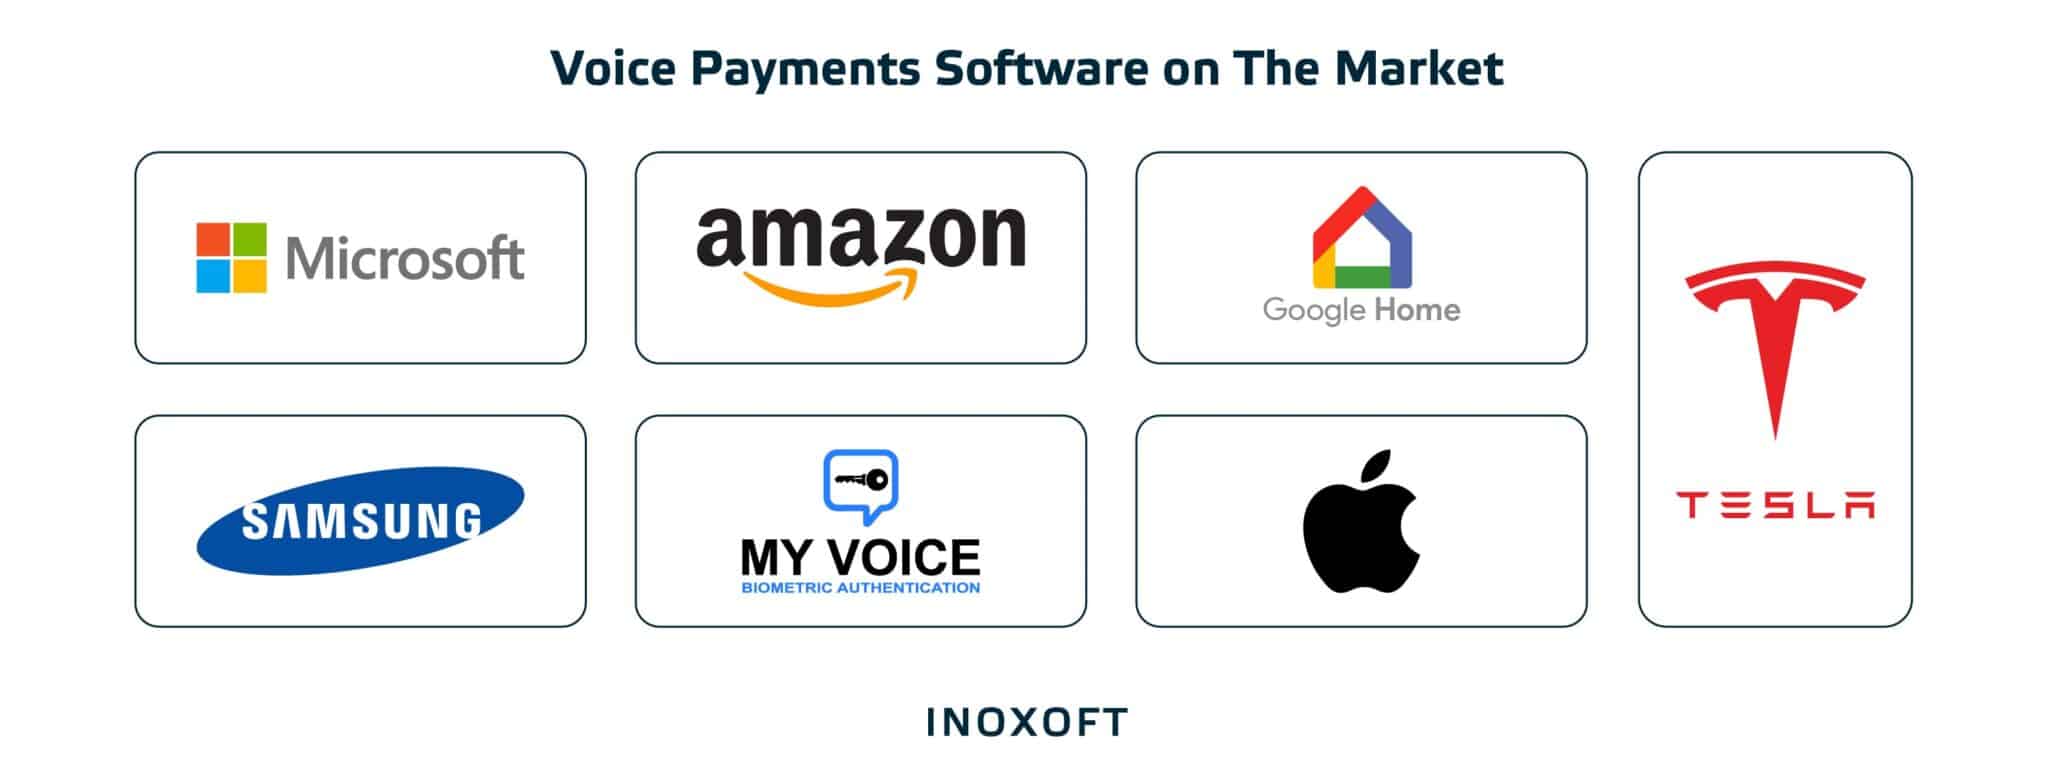 Voice Payments Software on the Market